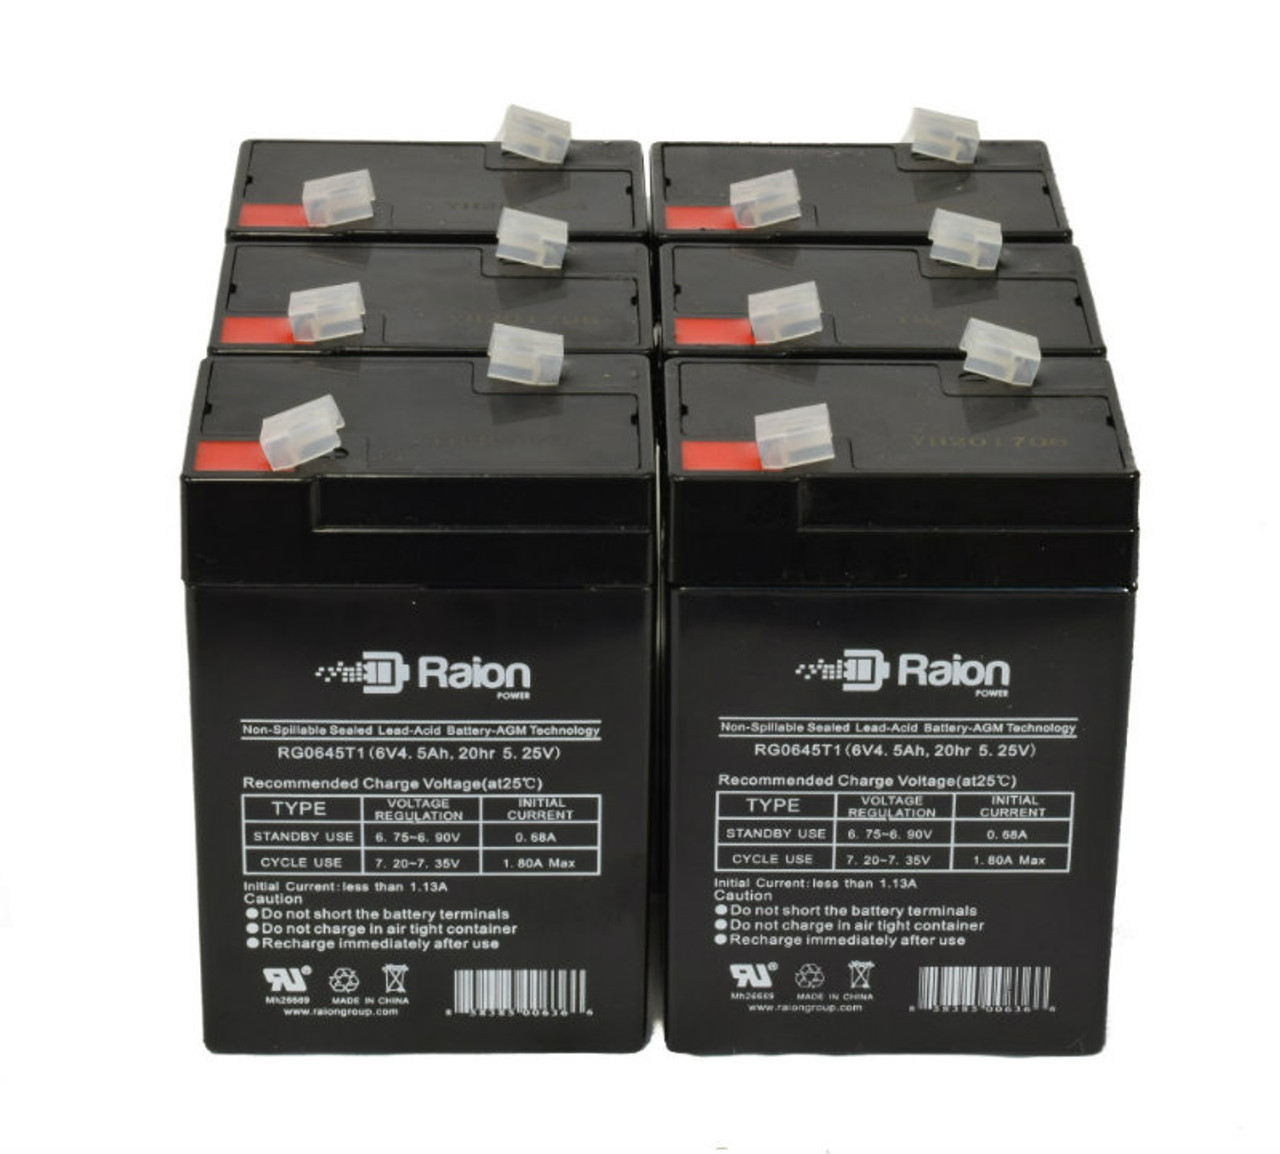 Raion Power 6 Volt 4.5Ah RG0645T1 Replacement Battery for LongWay 3FM5H - 6 Pack